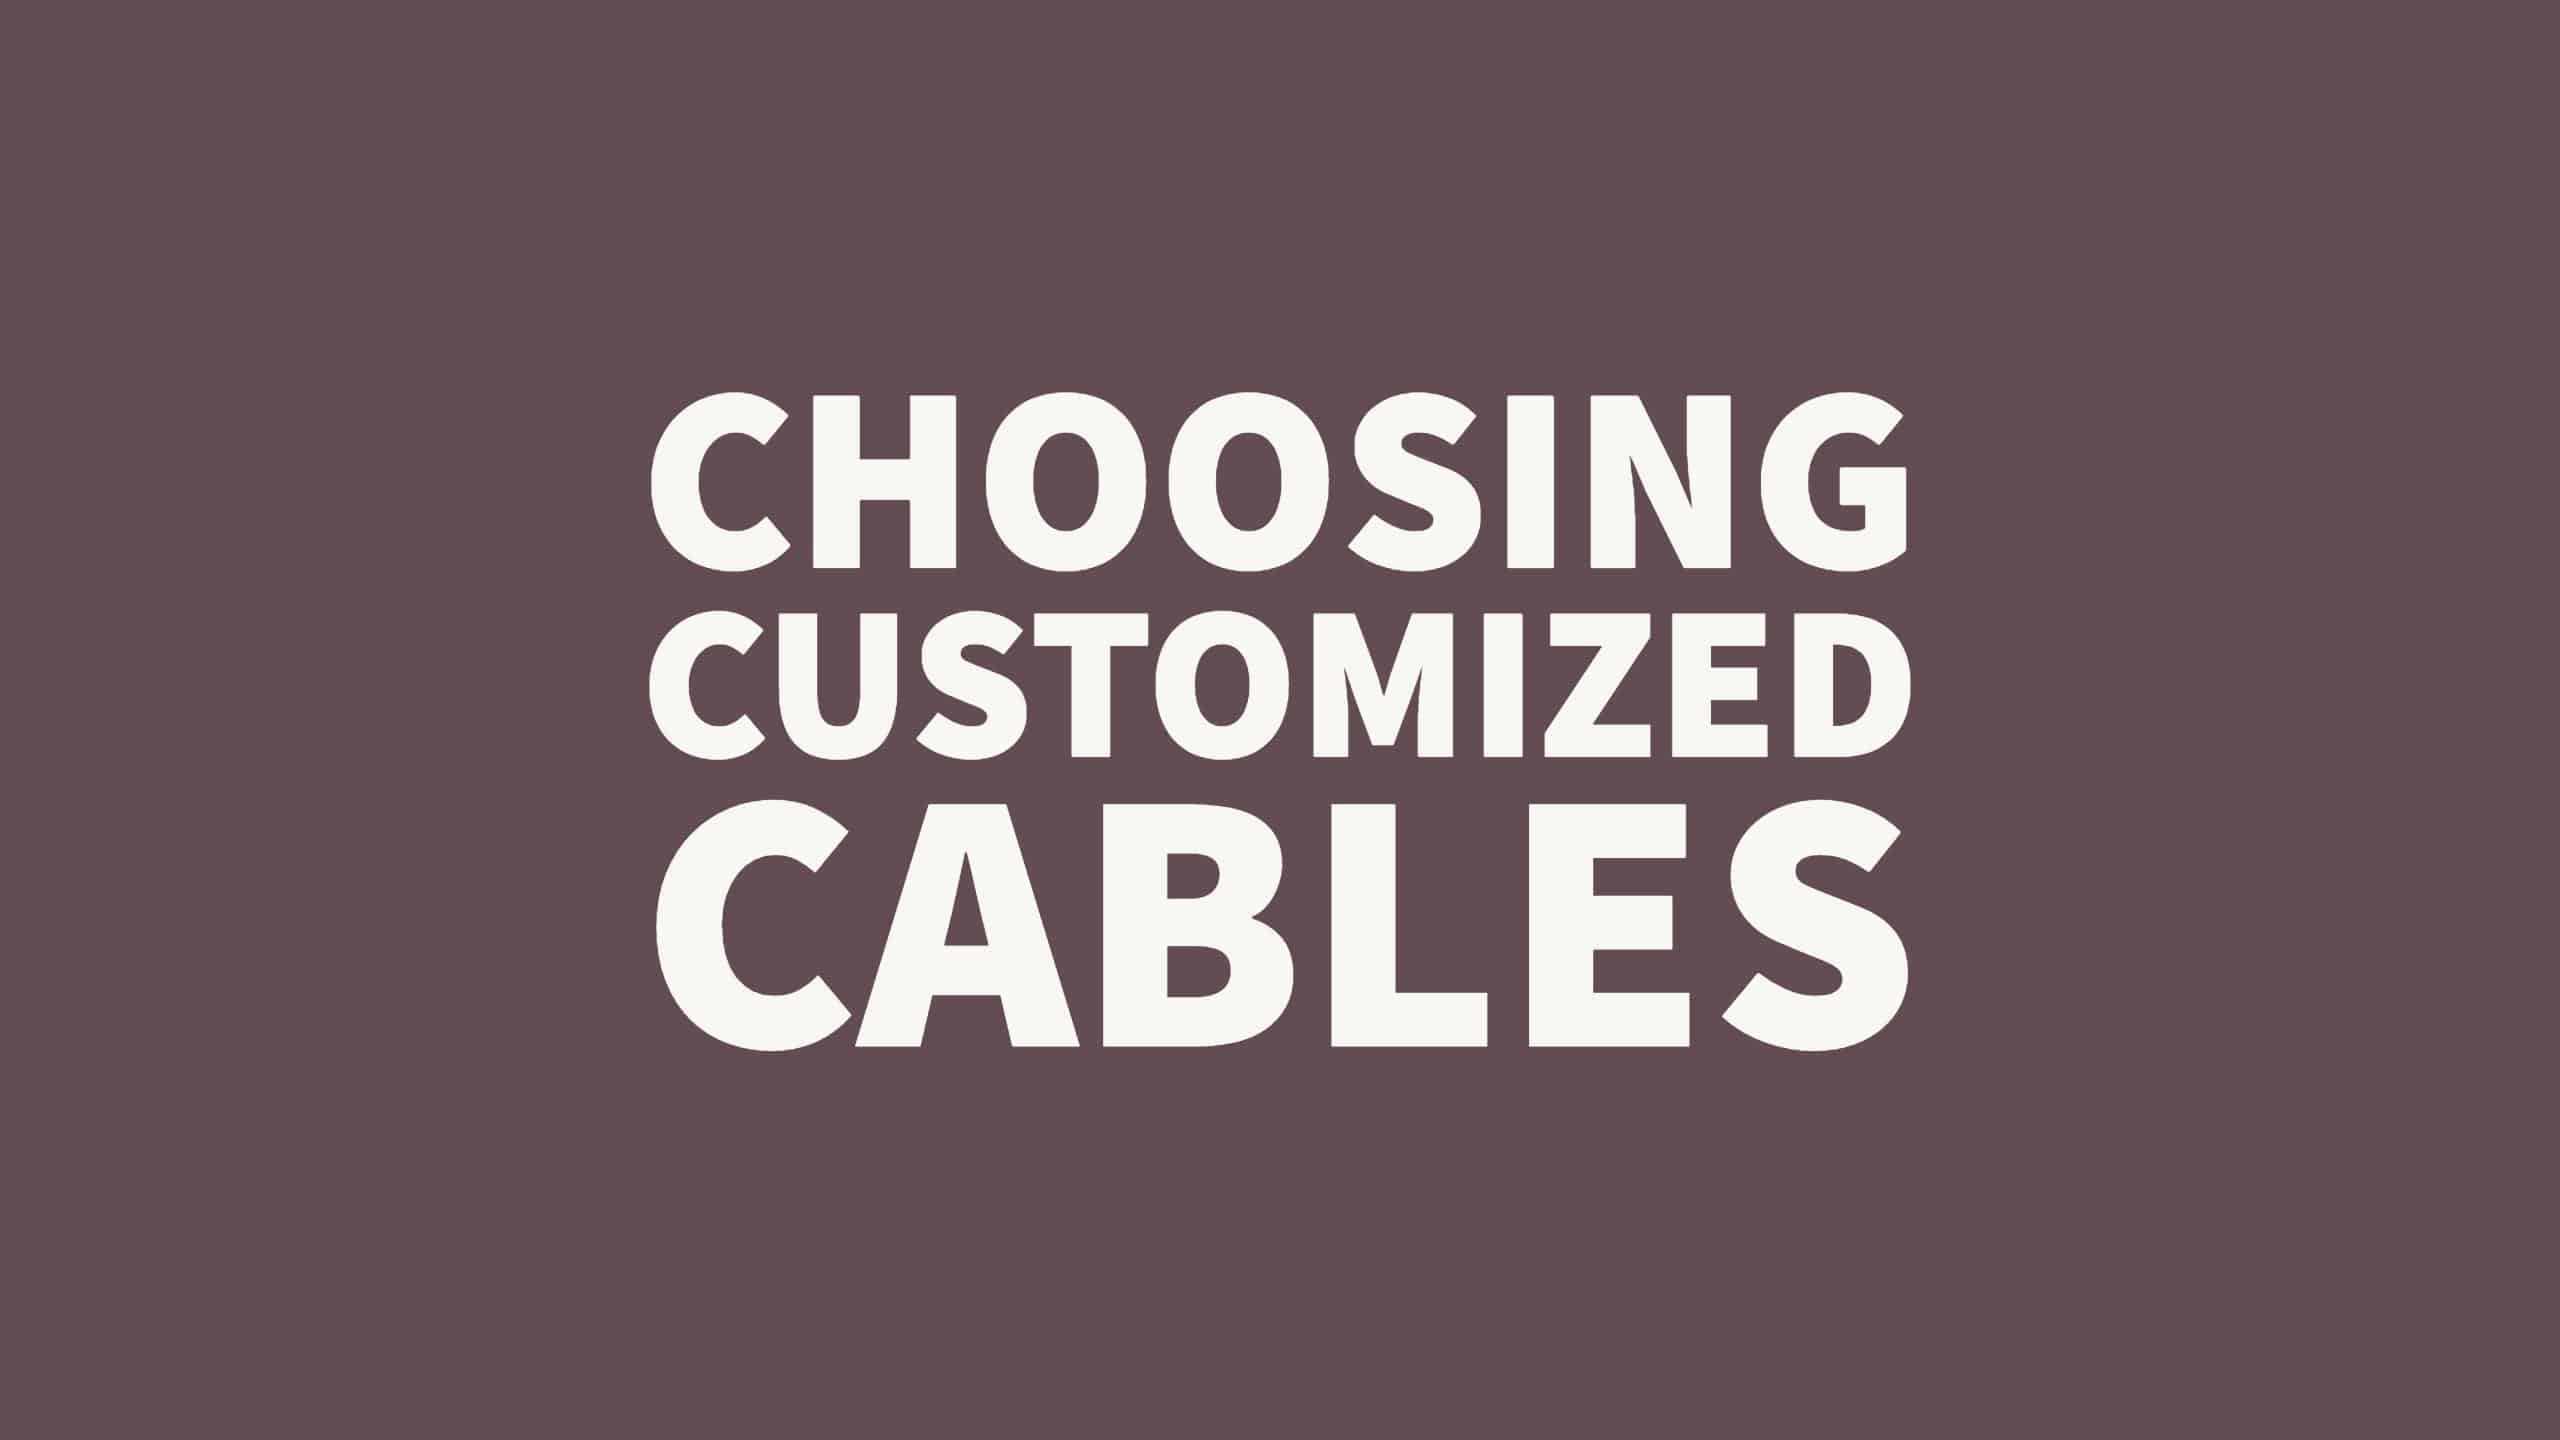 Choosing customized cables graphic